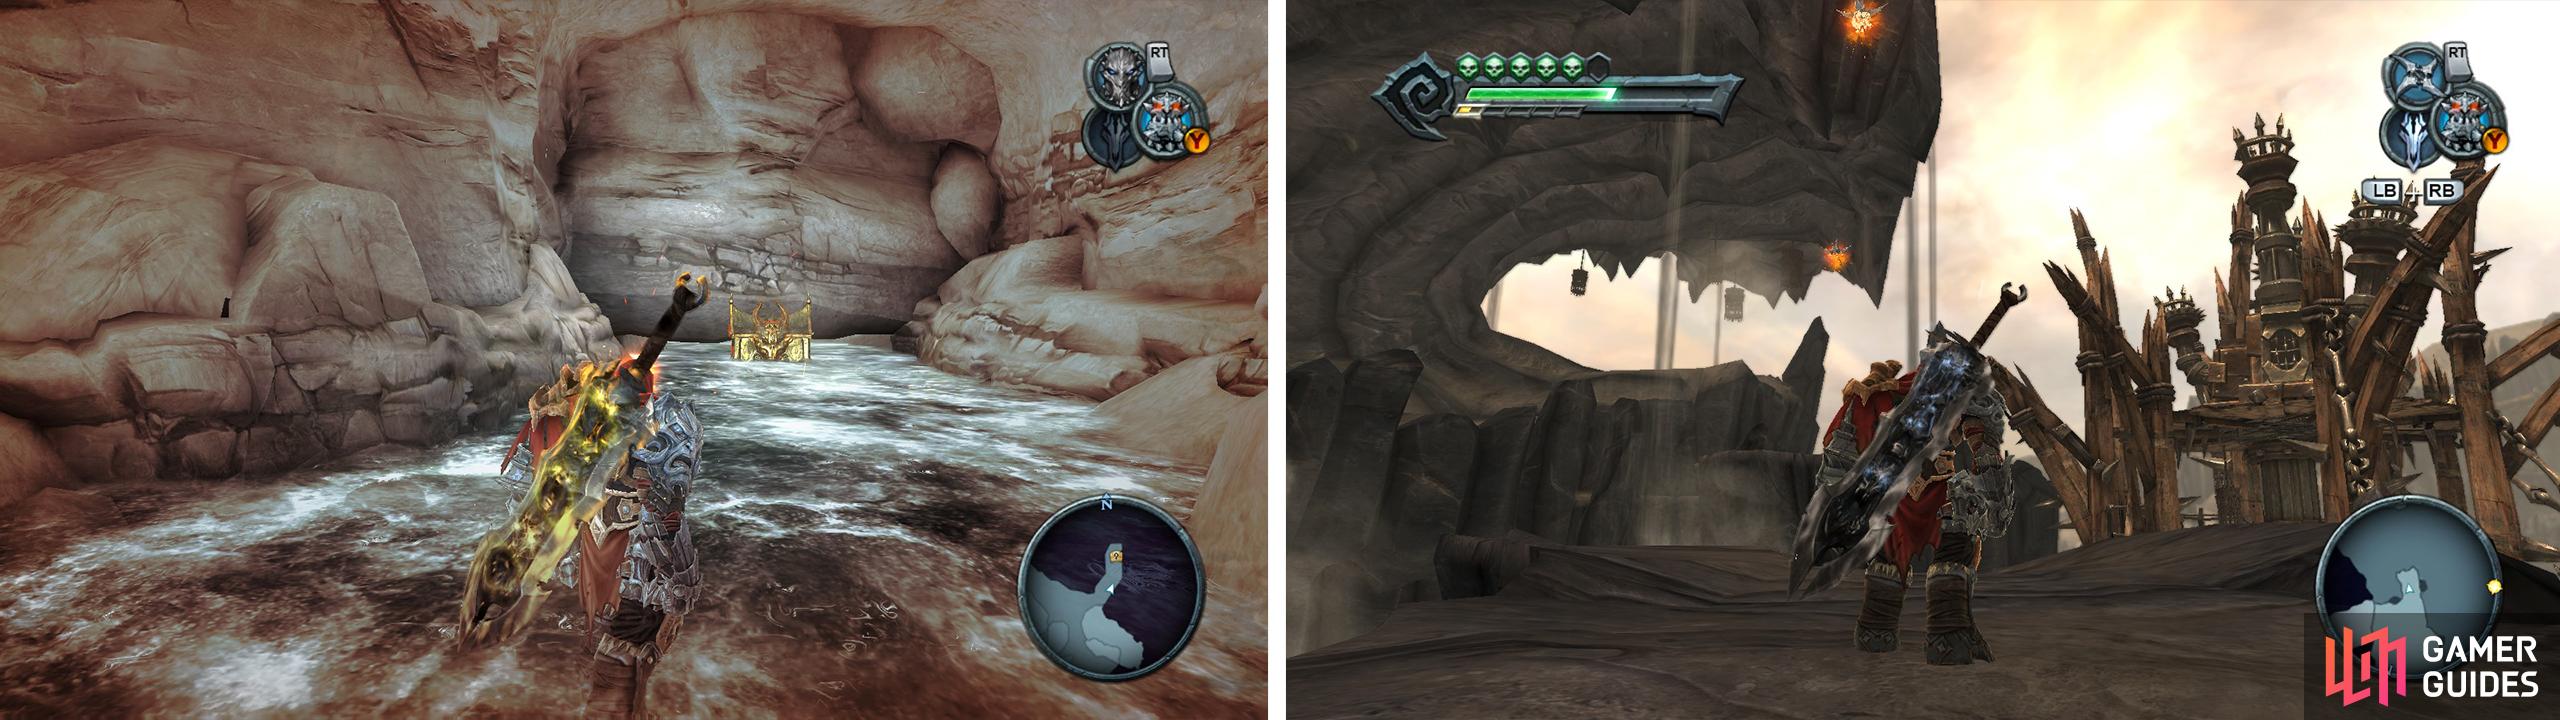 Eden: The armour can be found behind the waterfall (left). Ash Lands: Use the Abyssal Chain from the rocky platform accessible via the shadowflight geyser in the desert (right) to reach a rooftop with the armour.